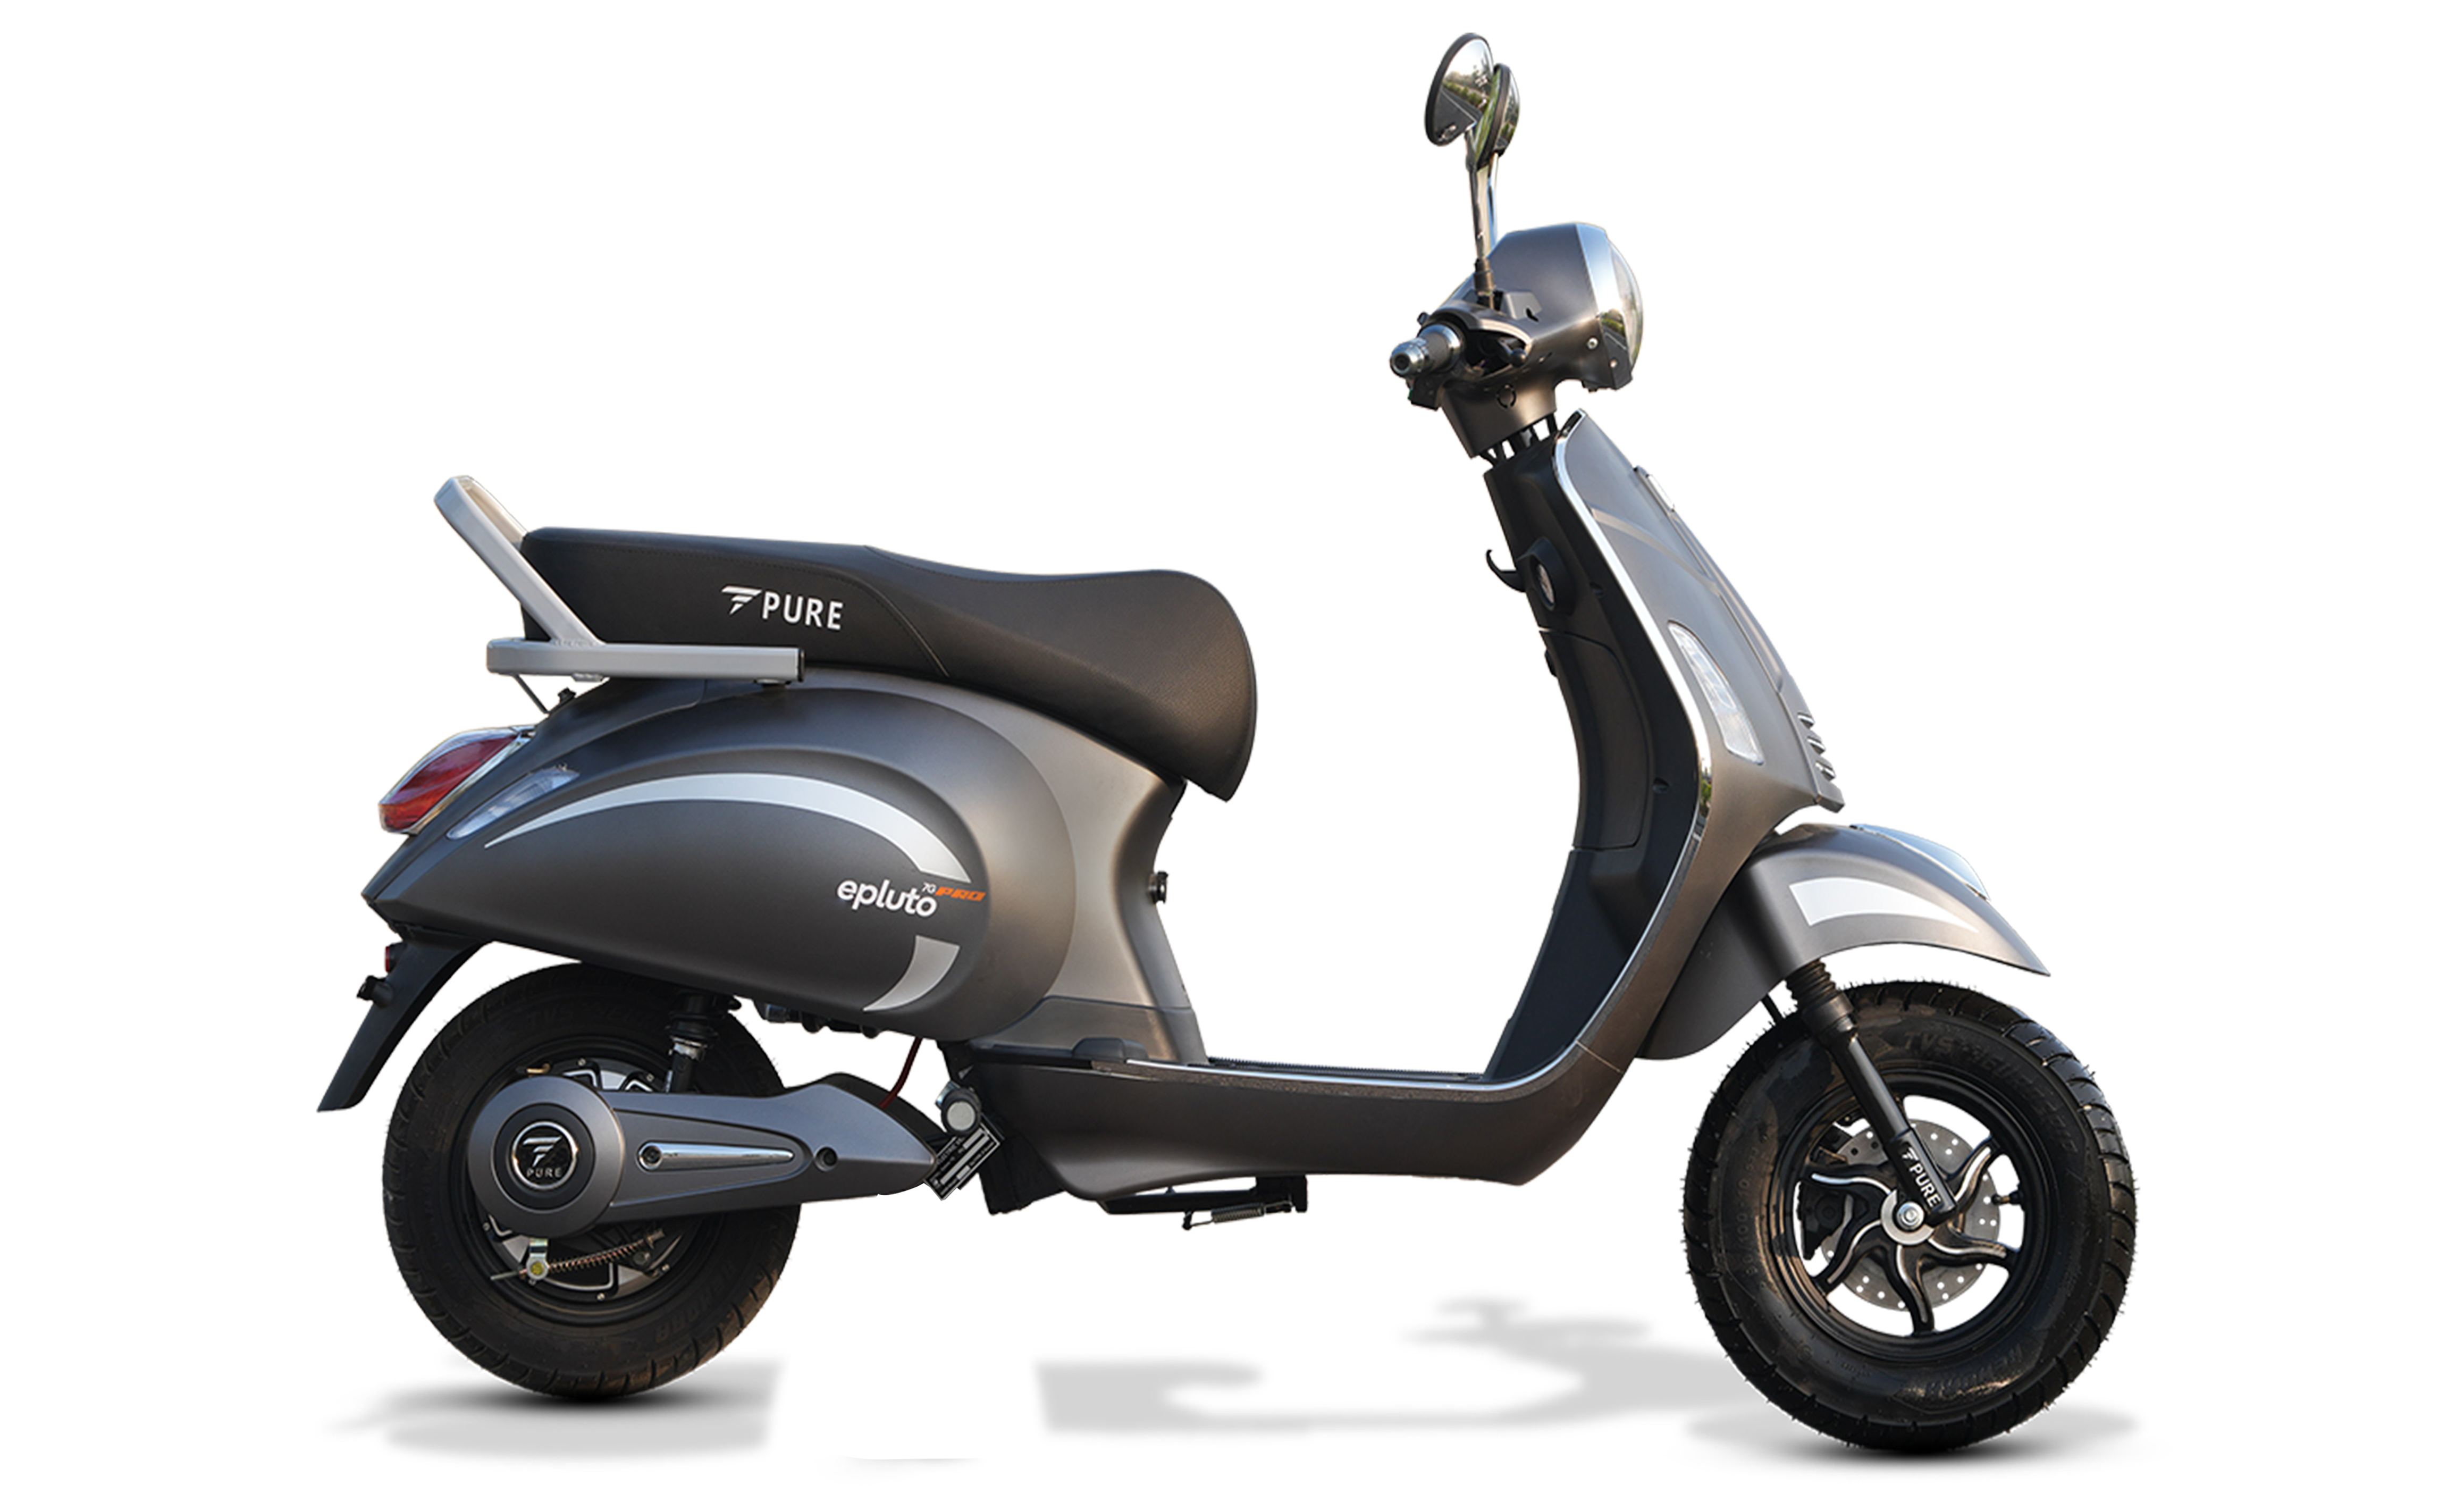 ePluto 7G PRO Electric Scooter Launched in India at 94,999 - snapshot